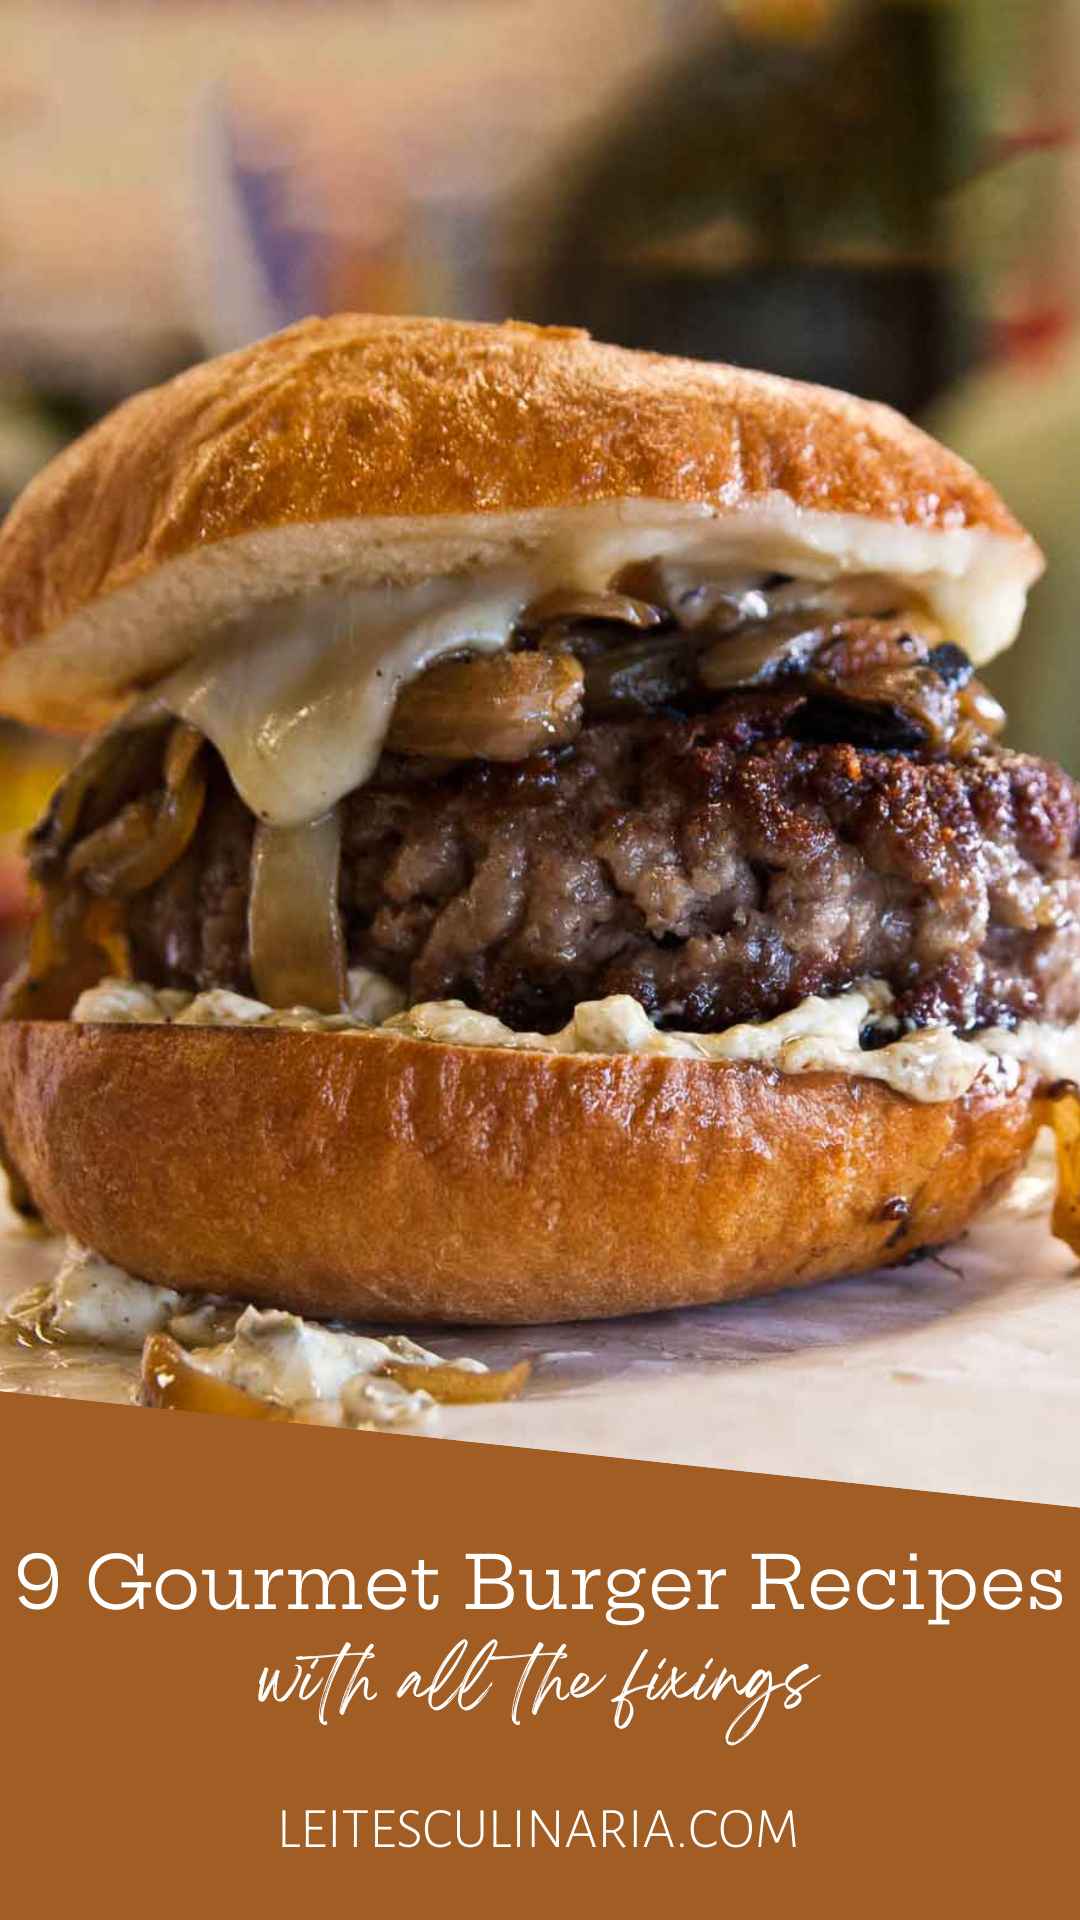 A juicy beef burger topped with cheese and onions.